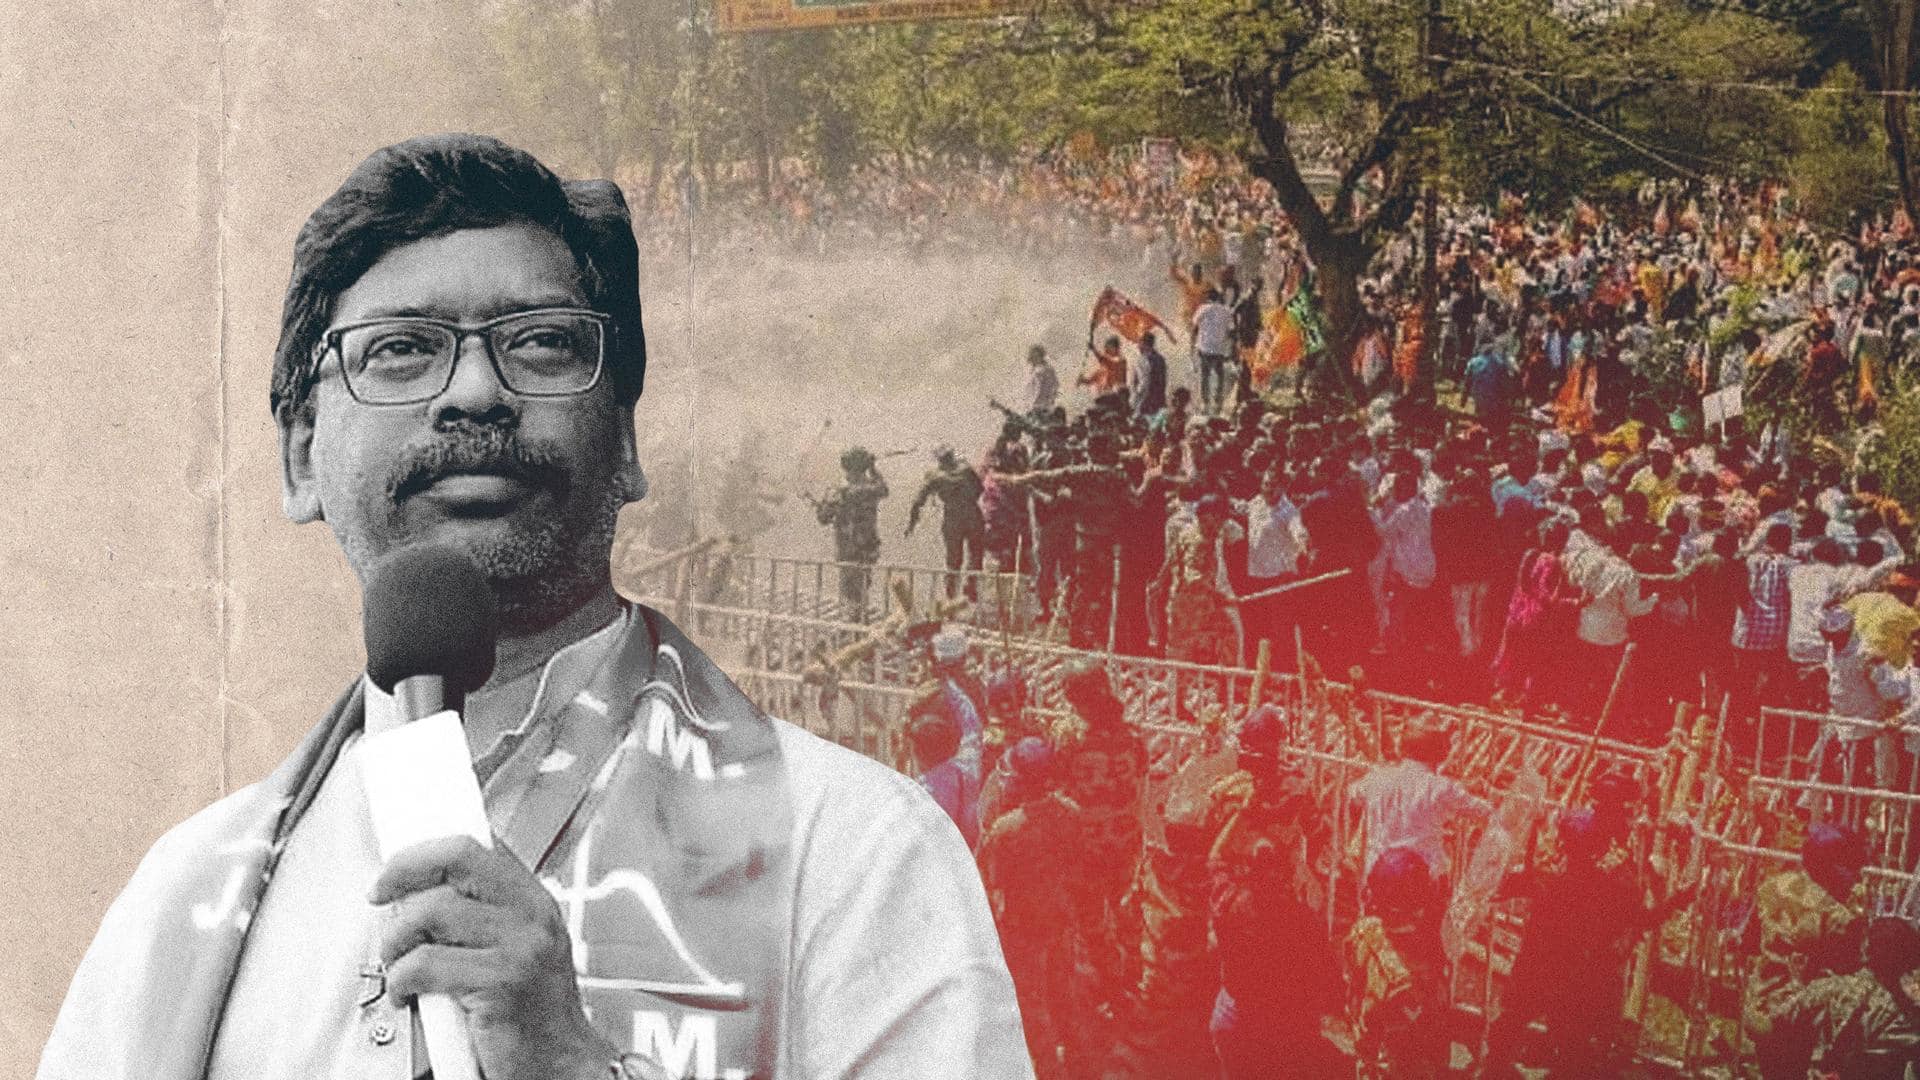 Why are student organizations in Jharkhand protesting